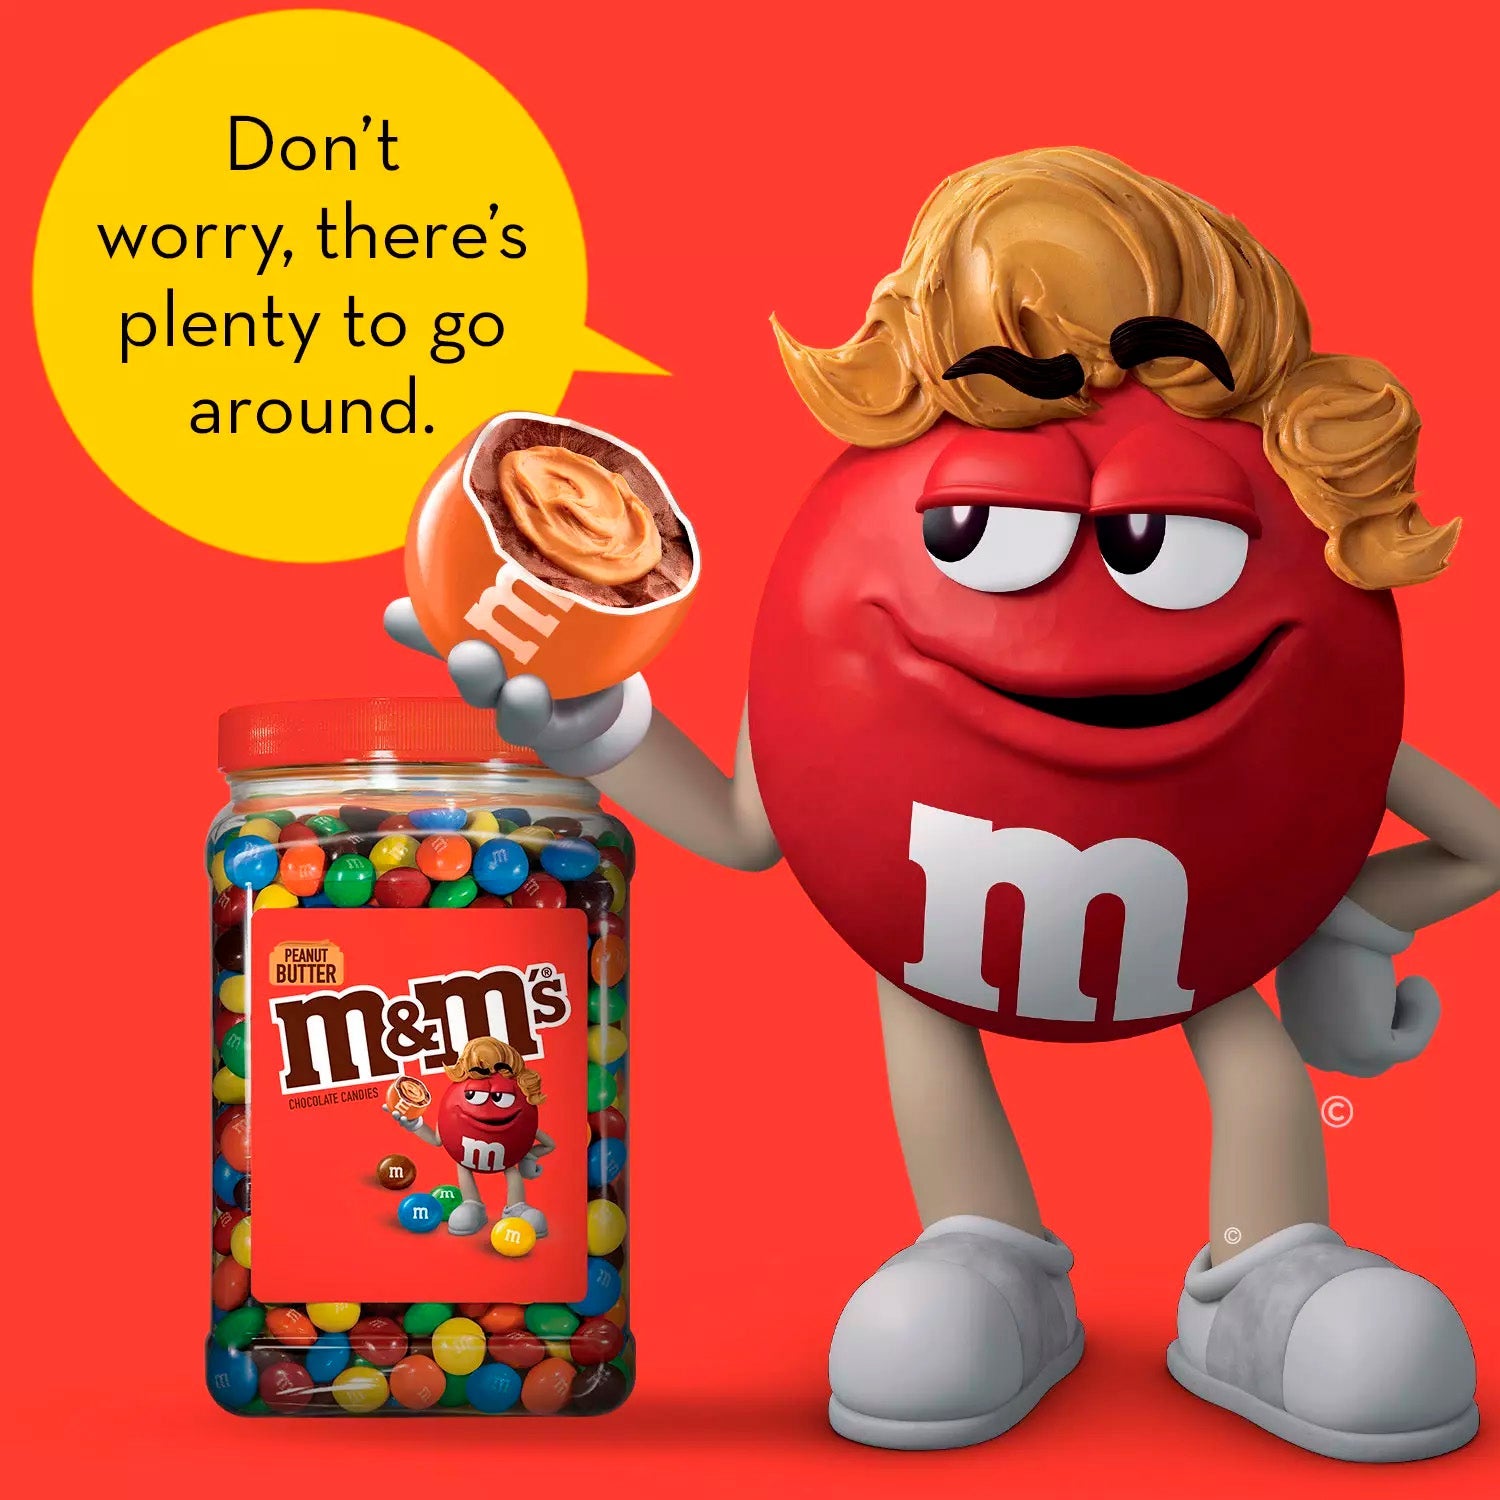 I Made M&M's Peanut Butter 